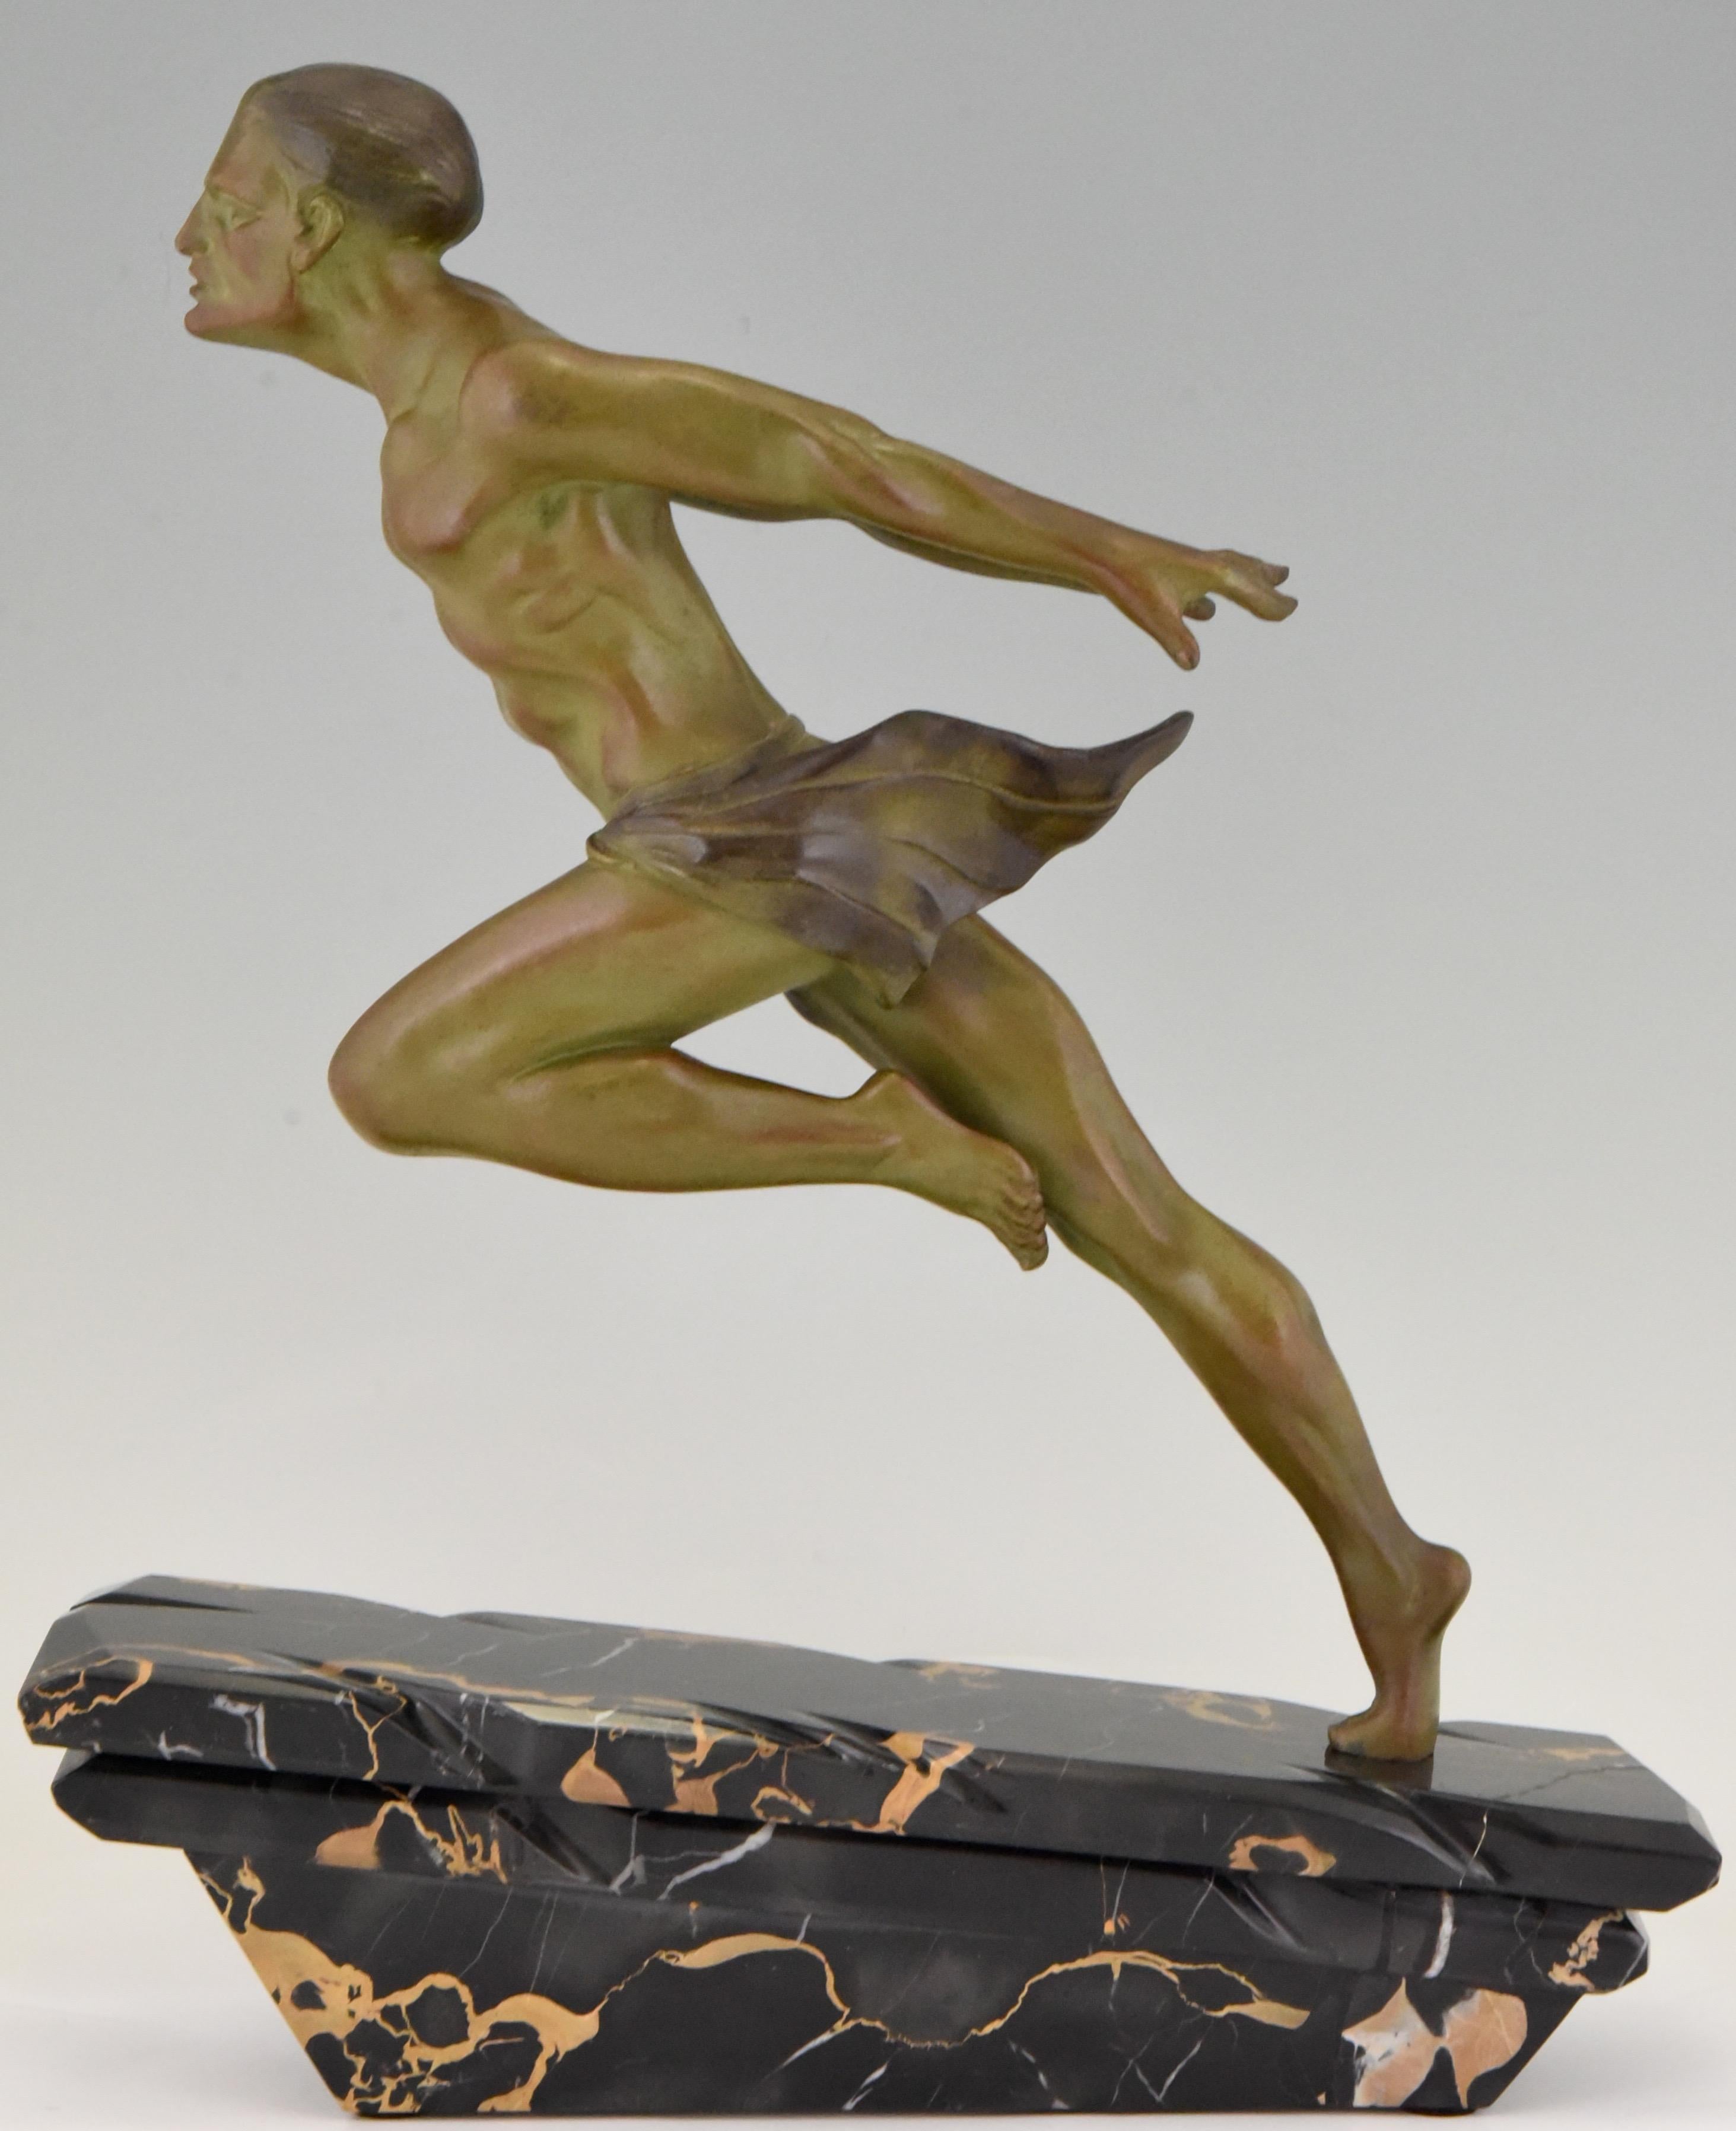 Art Deco sculpture of a running man or athlete signed by the sculptor L. Valderi, France, 1930. Patinated Art Metal on Portor marble base.
 